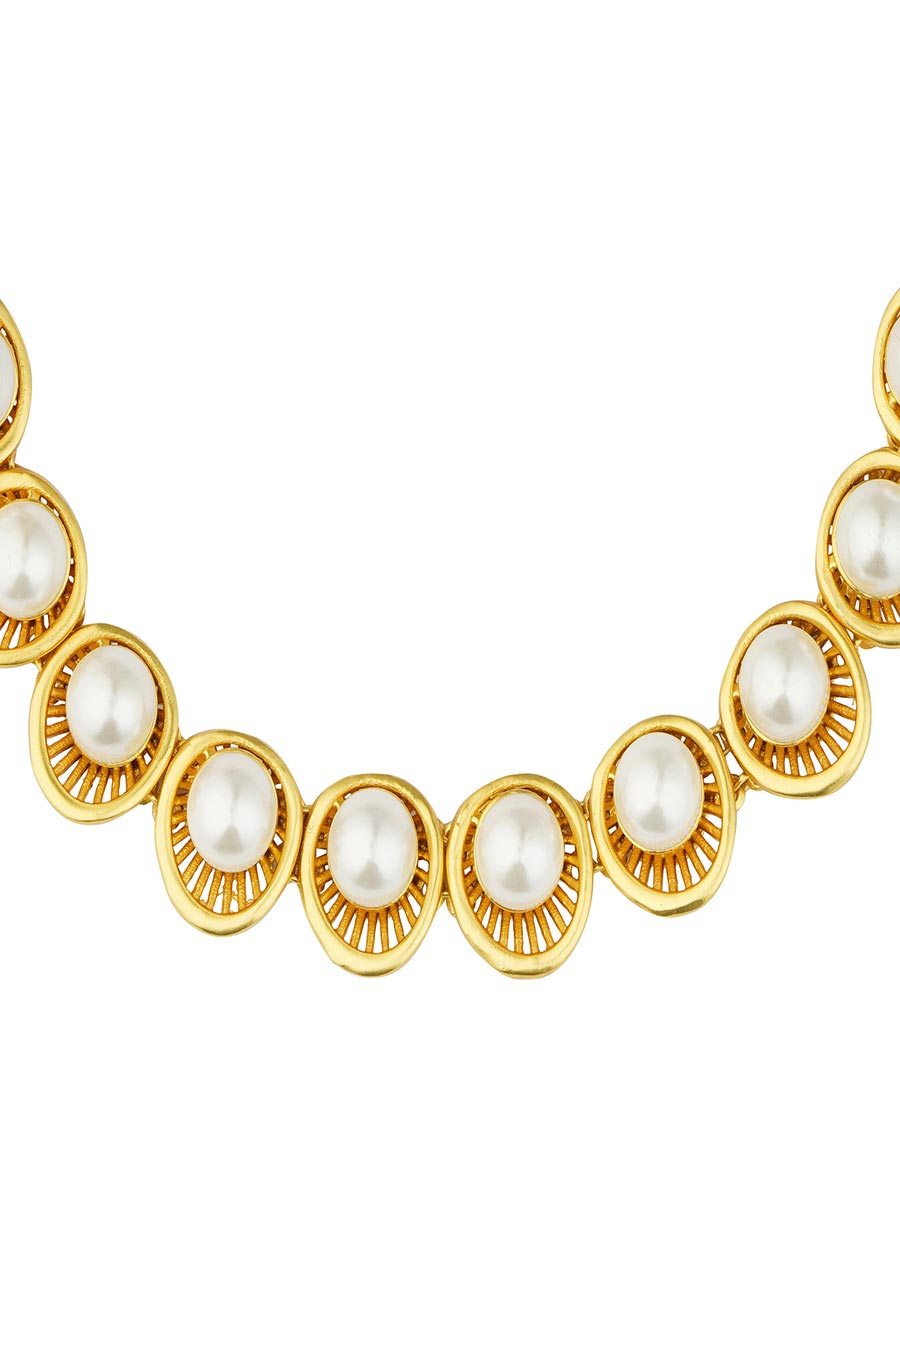 All That Glam - Gold Plated Pearl Necklace